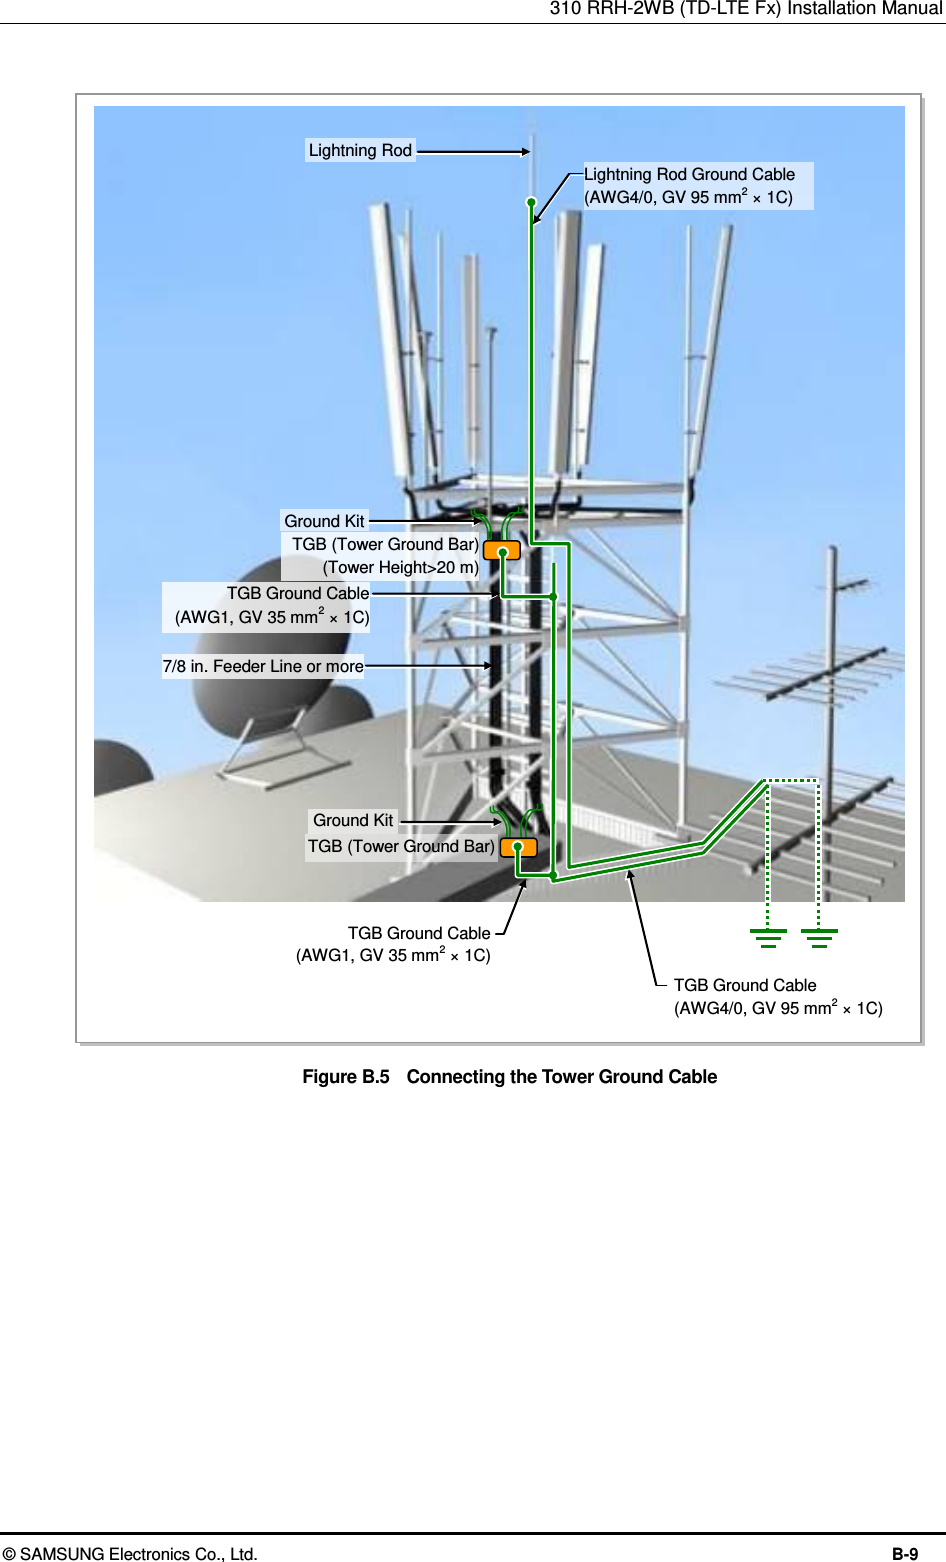 310 RRH-2WB (TD-LTE Fx) Installation Manual  © SAMSUNG Electronics Co., Ltd.  B-9  Figure B.5  Connecting the Tower Ground Cable    Lightning Rod 7/8 in. Feeder Line or more Ground Kit TGB (Tower Ground Bar)   (Tower Height&gt;20 m) TGB Ground Cable   (AWG1, GV 35 mm2 × 1C) Lightning Rod Ground Cable (AWG4/0, GV 95 mm2 × 1C) TGB (Tower Ground Bar) Ground Kit TGB Ground Cable   (AWG1, GV 35 mm2 × 1C) TGB Ground Cable (AWG4/0, GV 95 mm2 × 1C) 